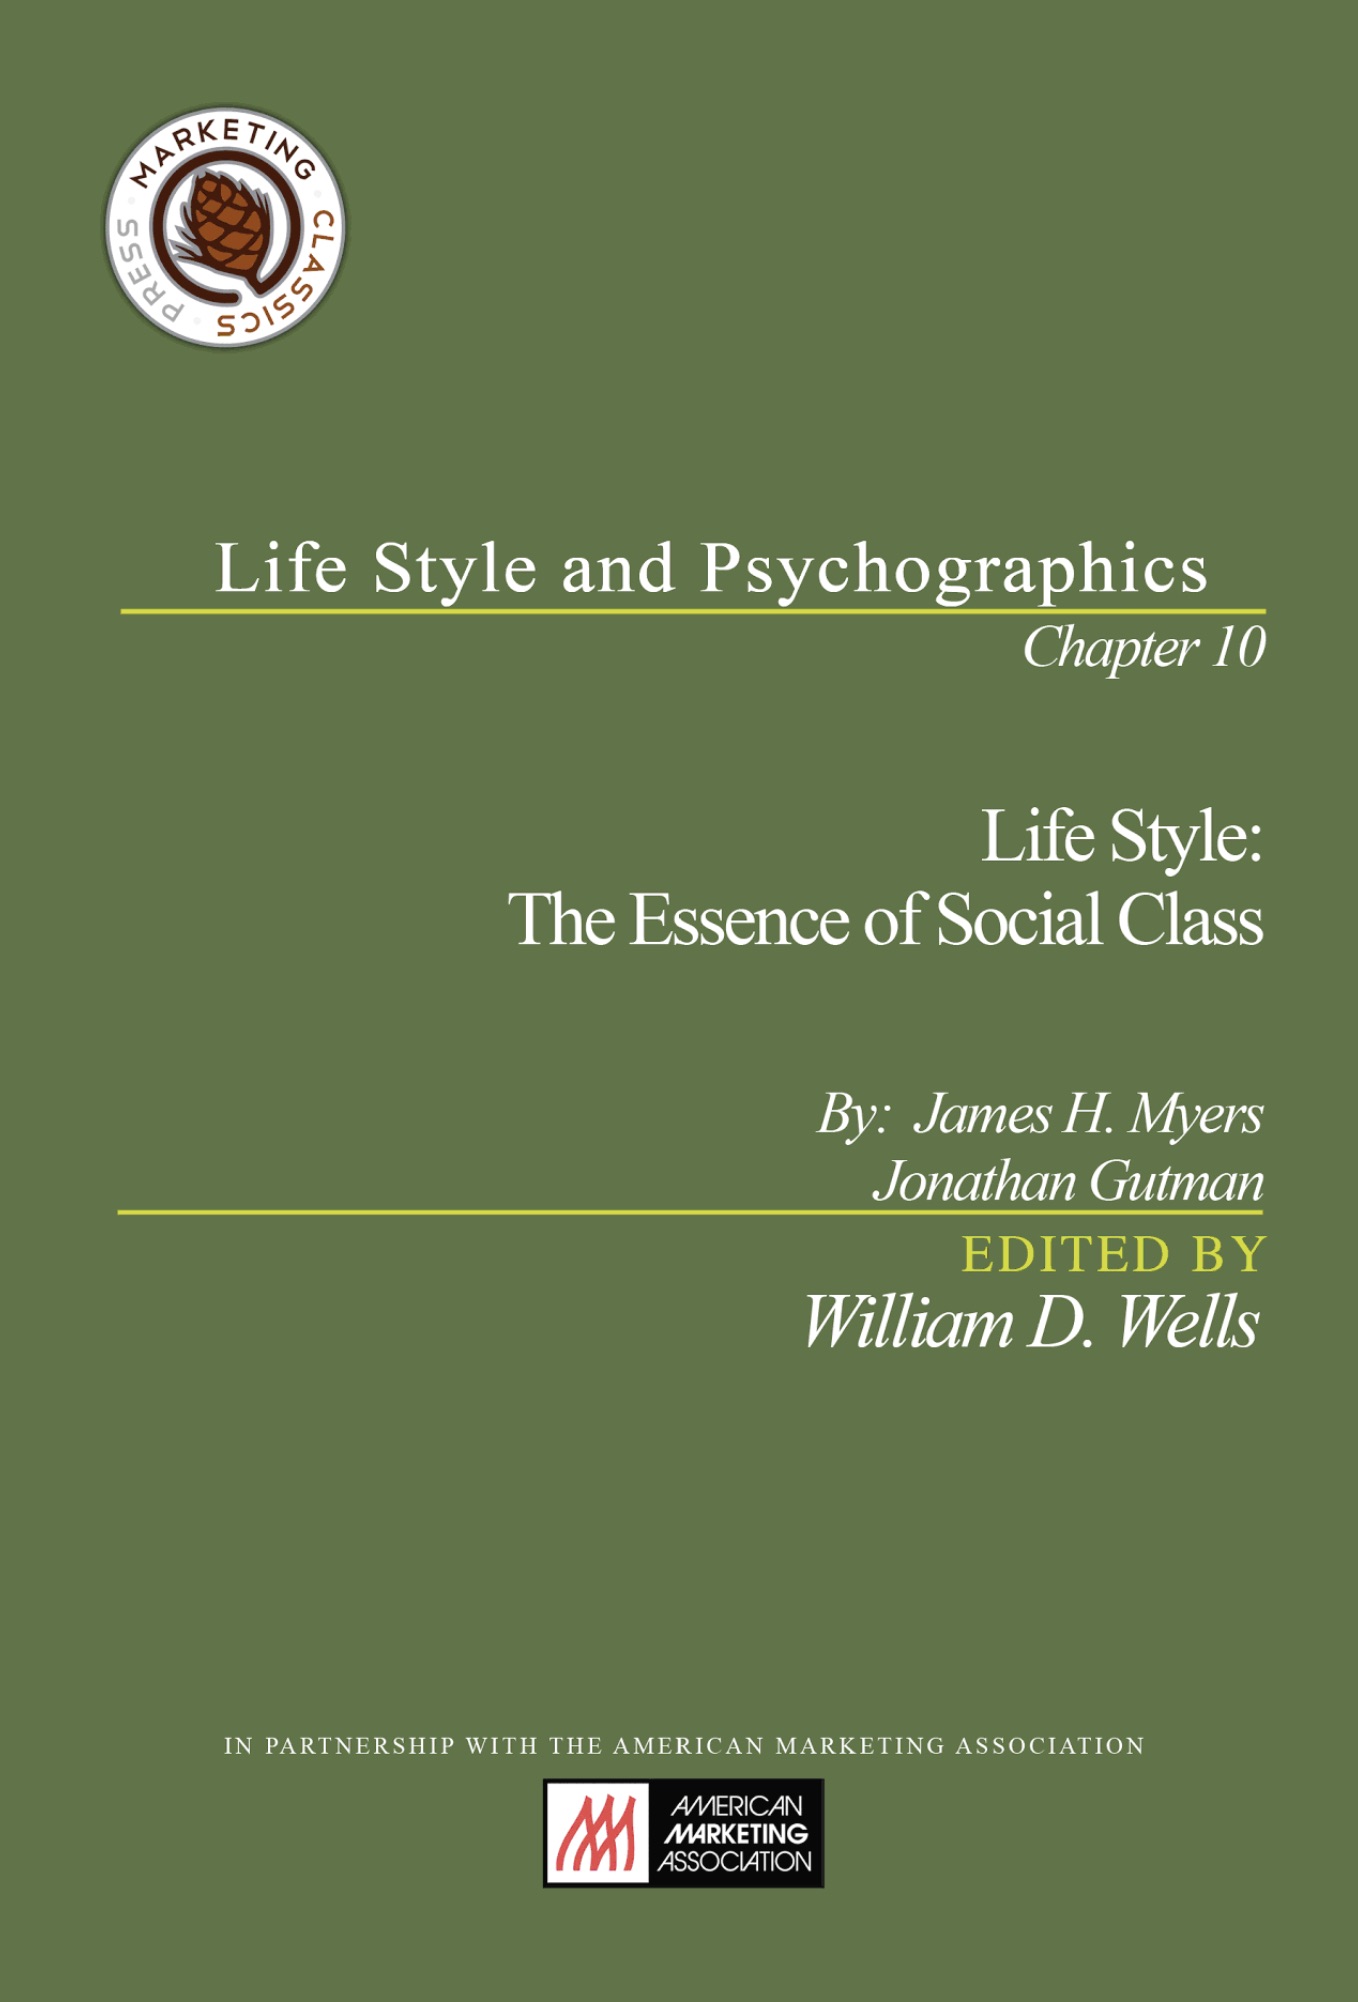 Life Style: The Essence of Social Class